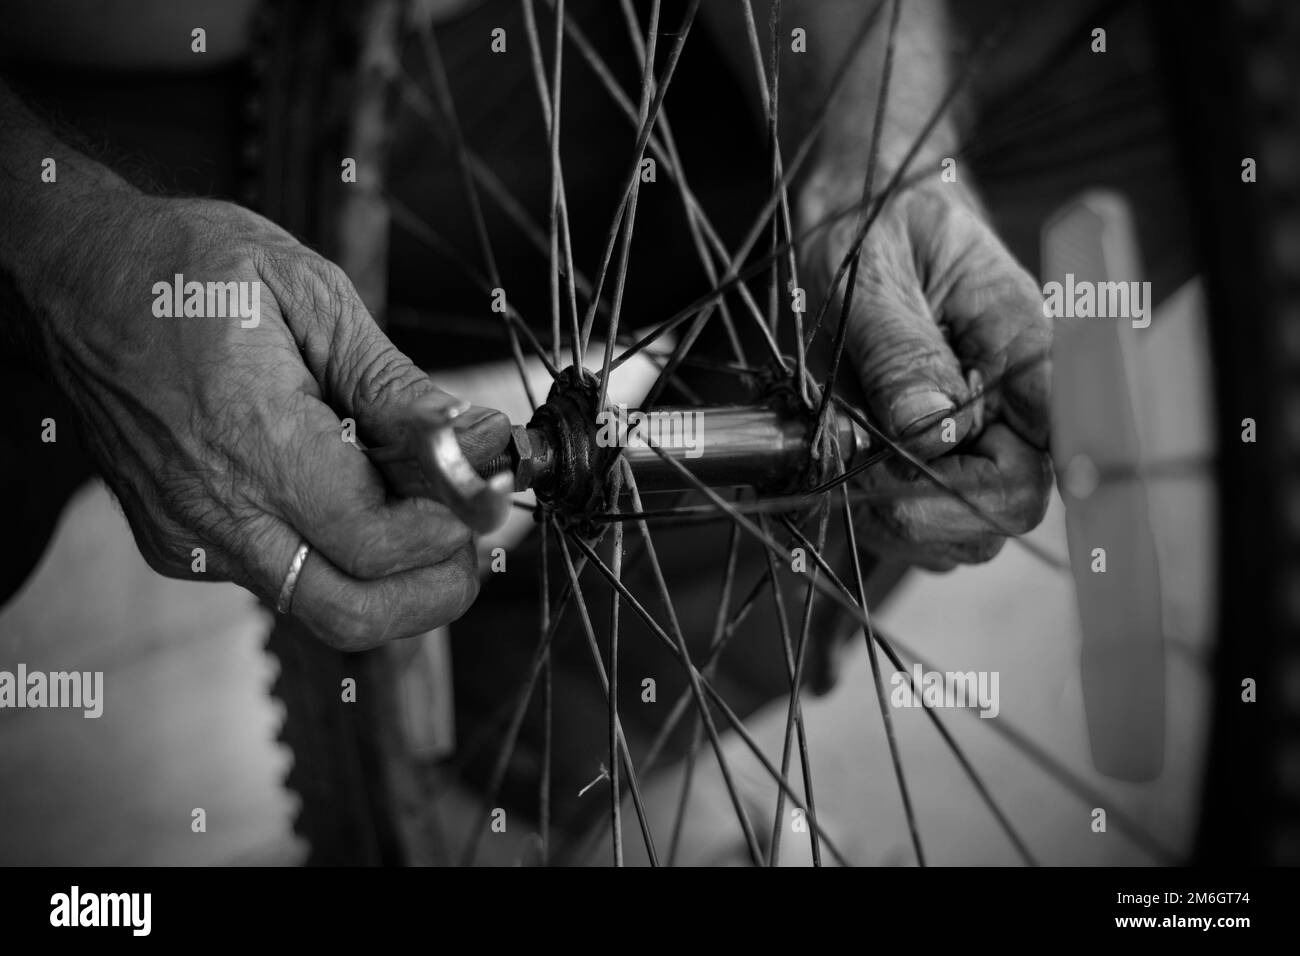 The old man working on a motorcycle tire with tools in close view in a service shop using fingers in hands Stock Photo